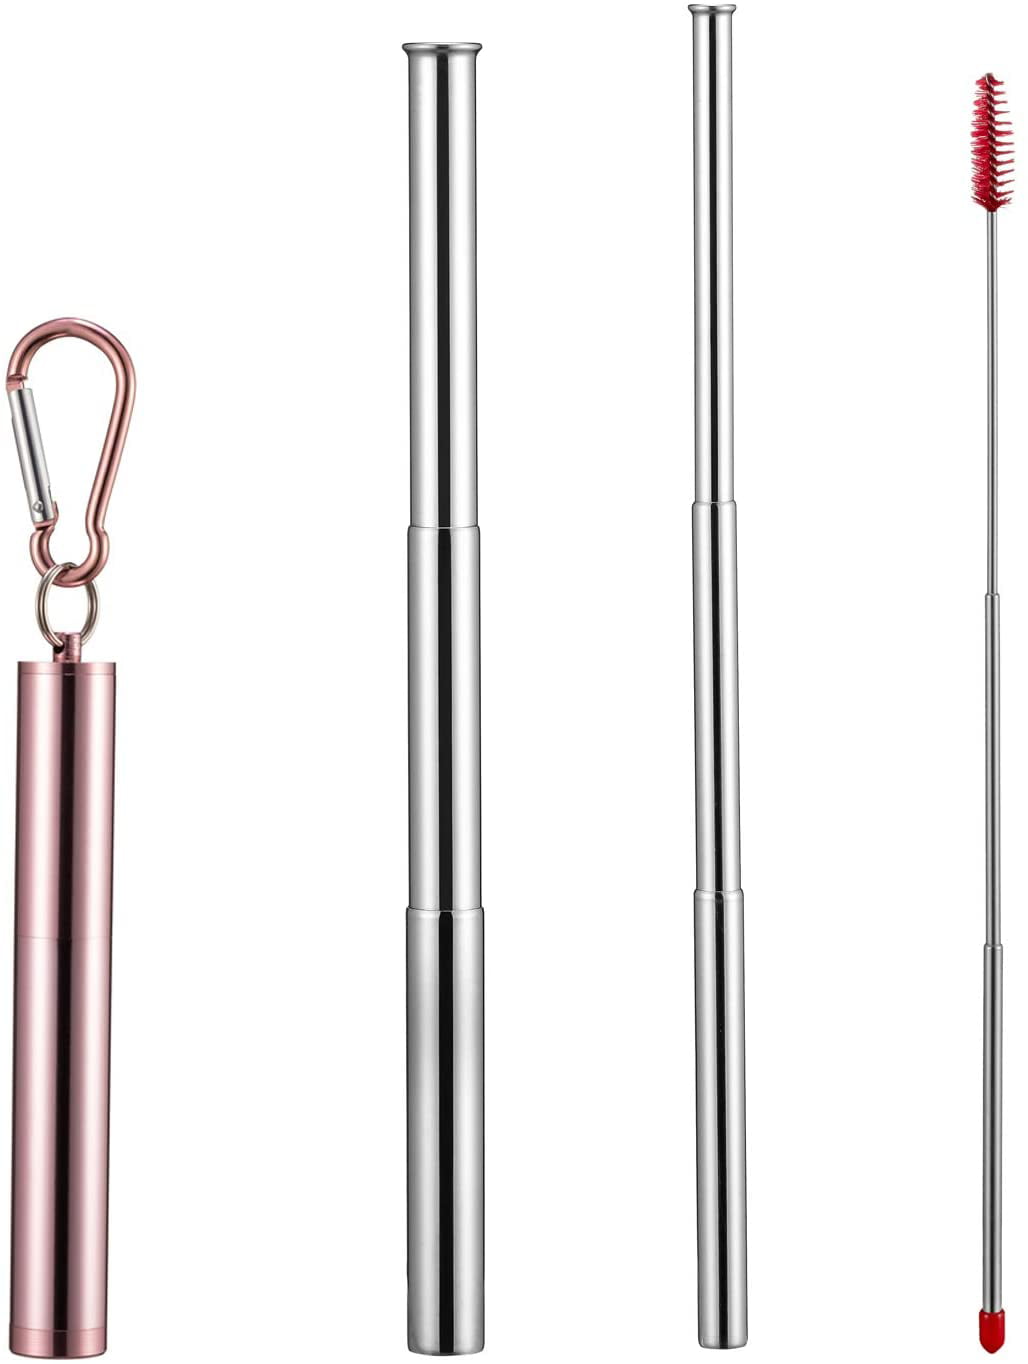 Reusable Drinking Straws Stainless Steel Metal Straw Portable Foldable w/ Case 